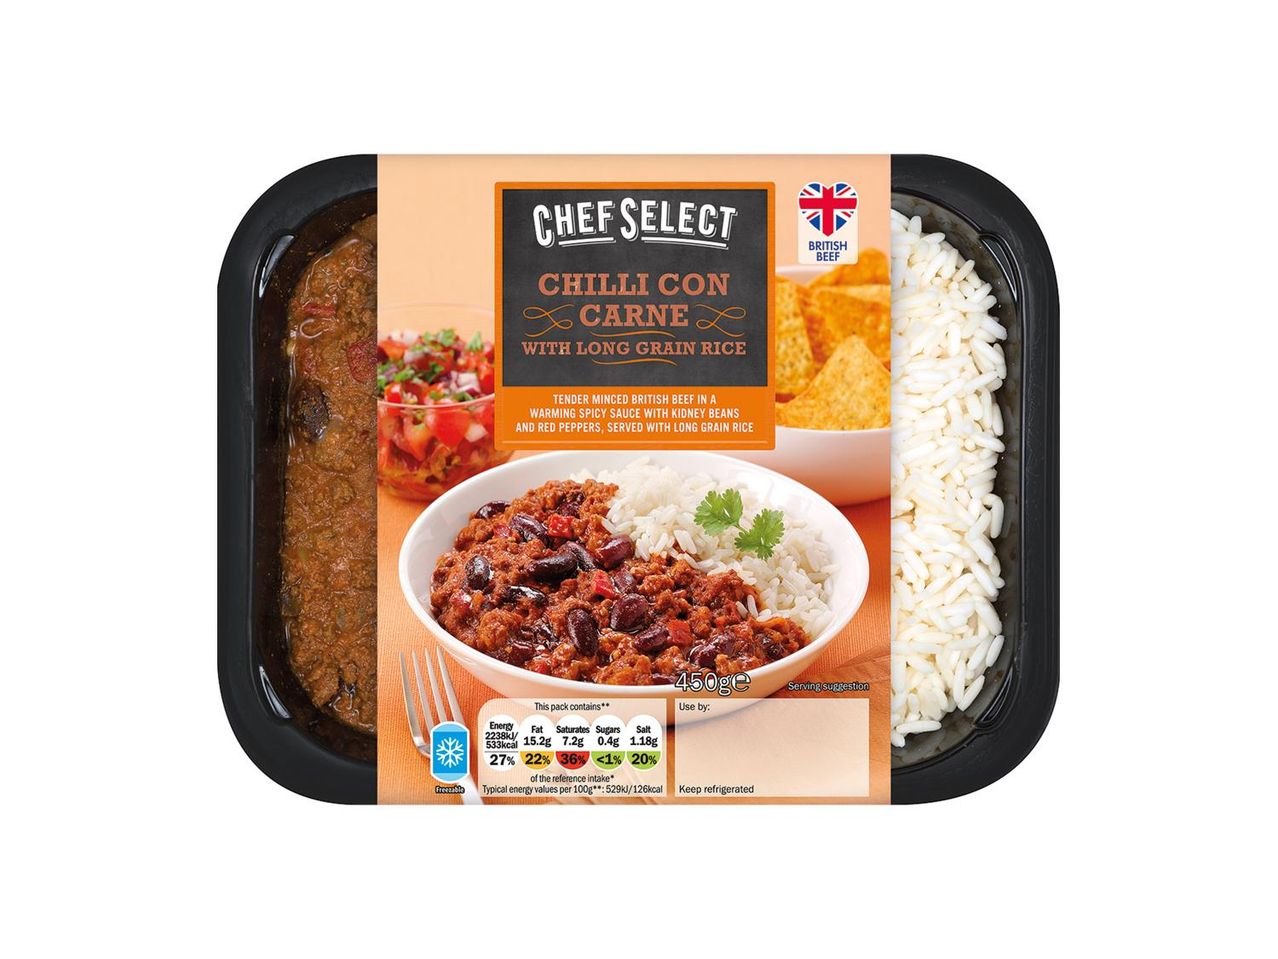 Go to full screen view: Chef Select Chilli Con Carne With Long Grain Rice - Image 1